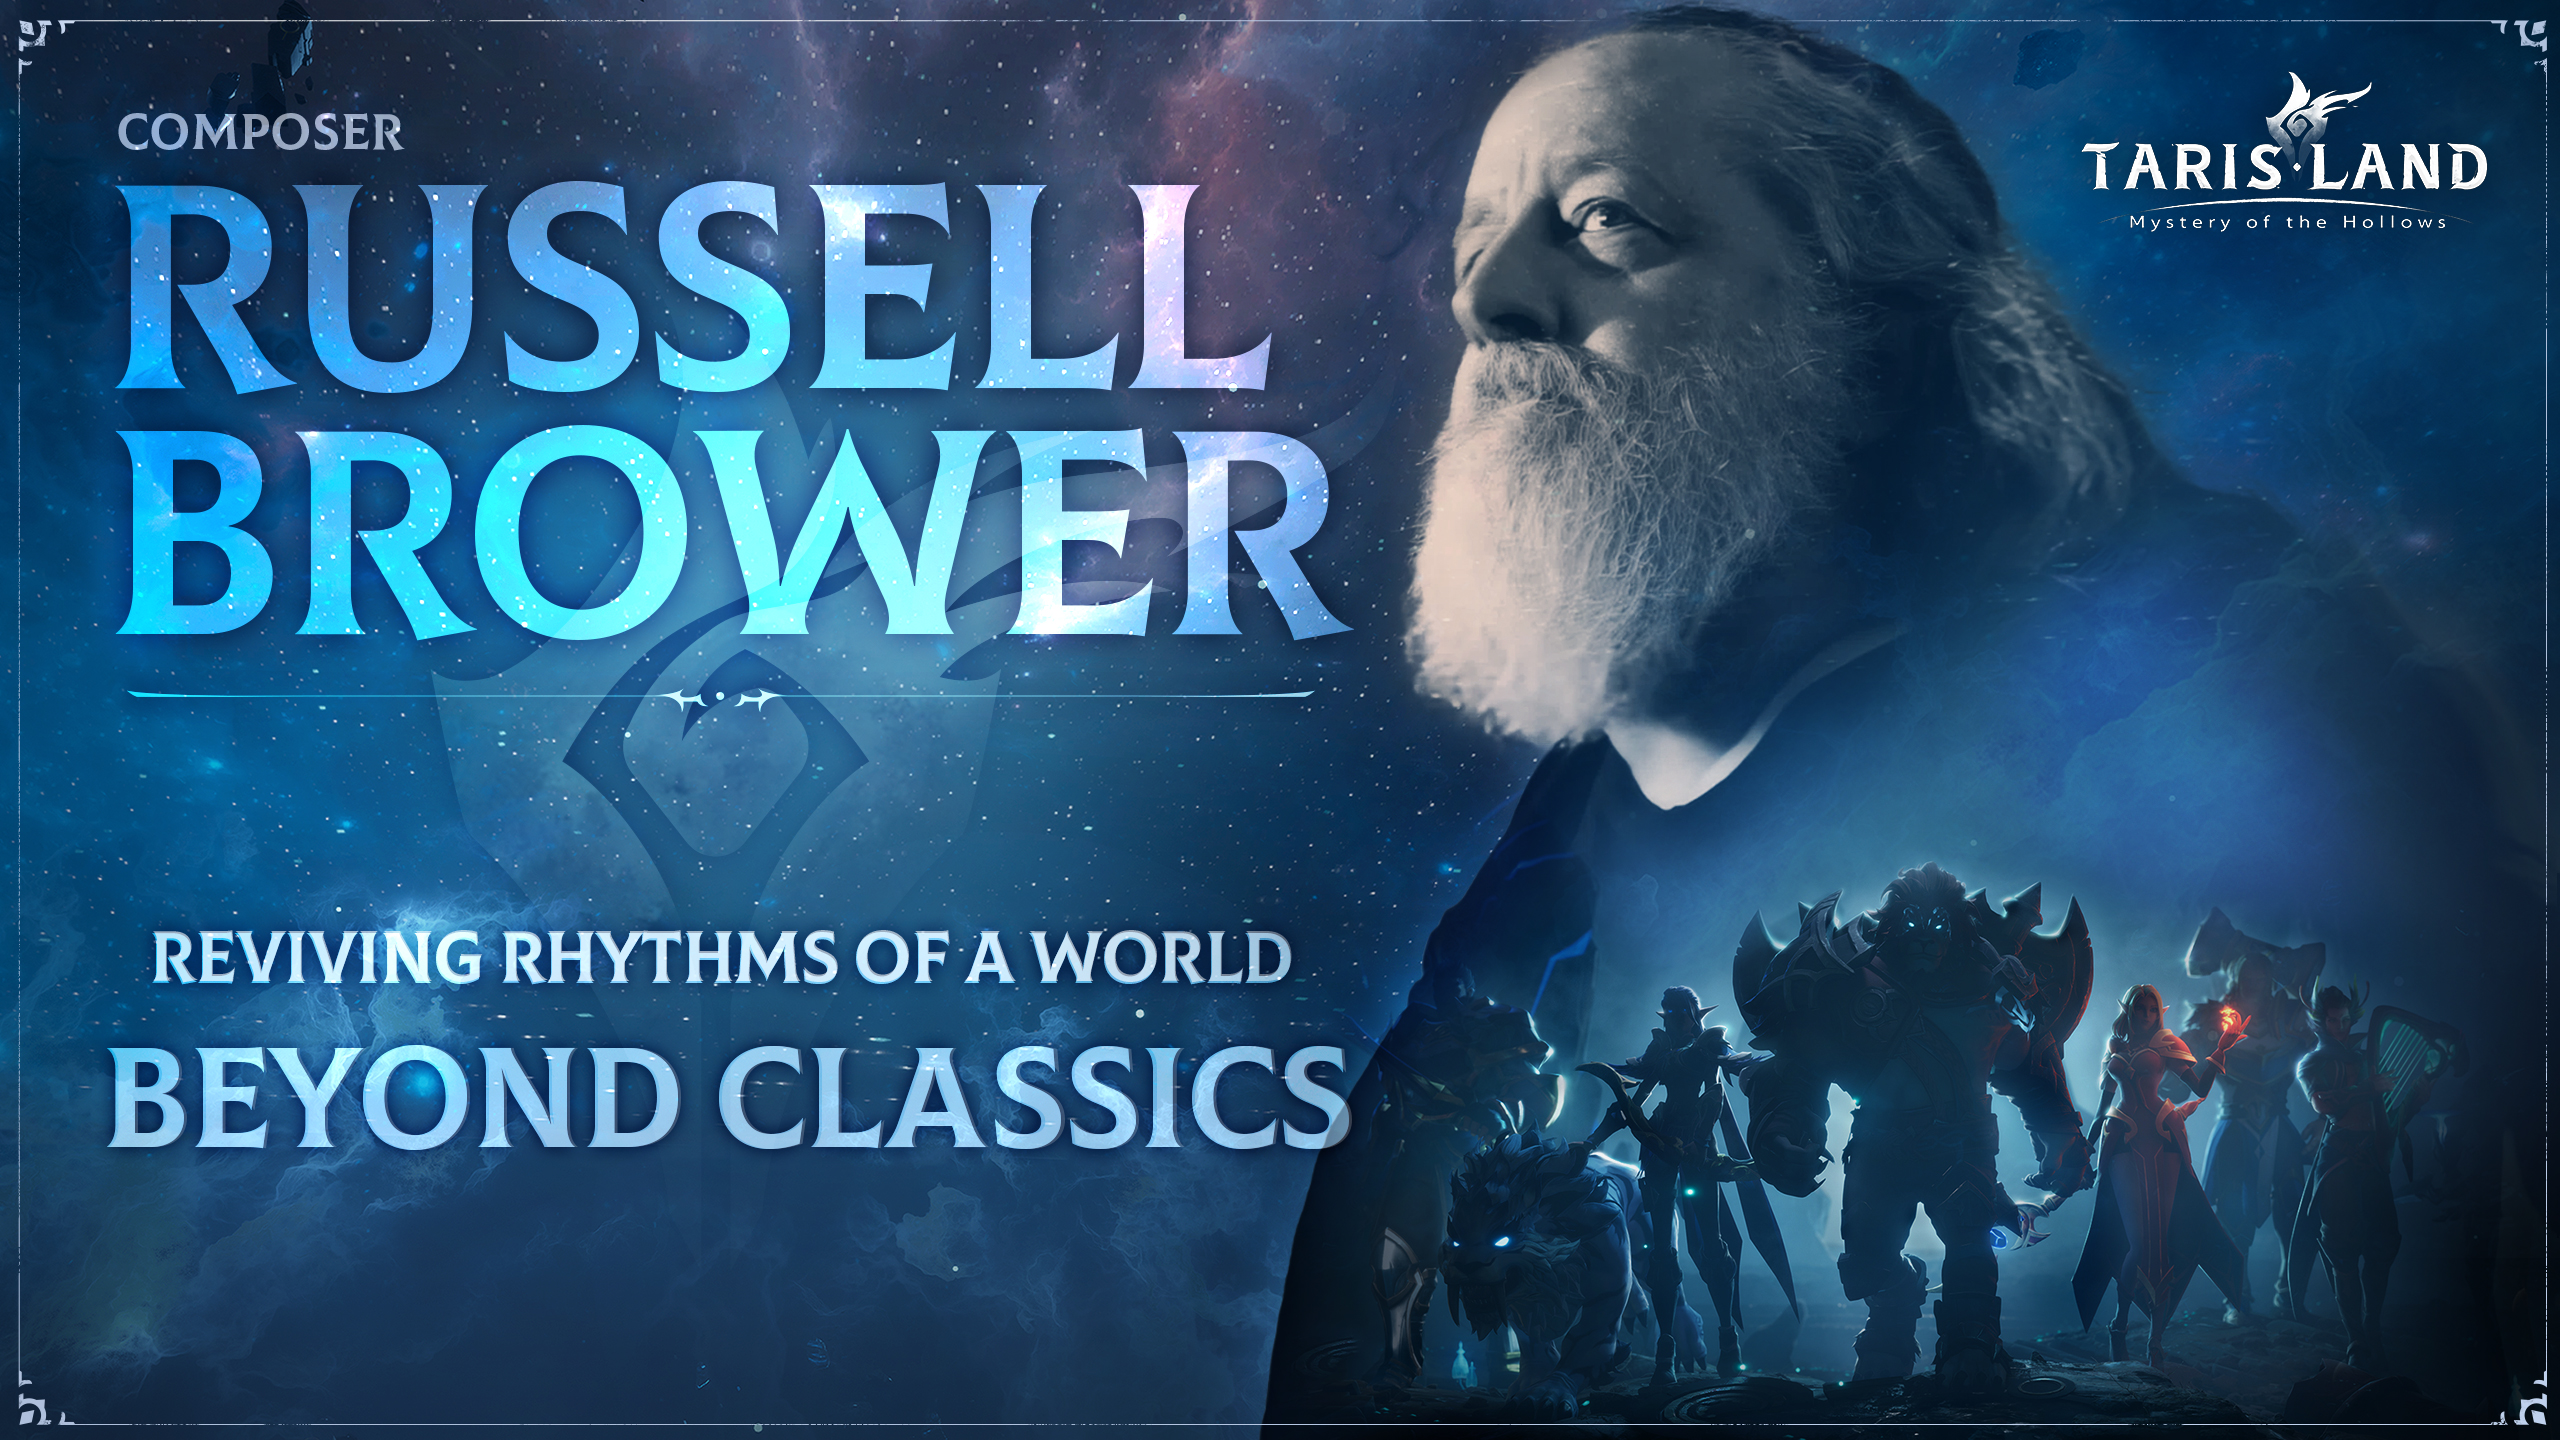 Tarisland Joins Forces with Renowned Composer Russell Brower for Grammy-Worthy Epic Music